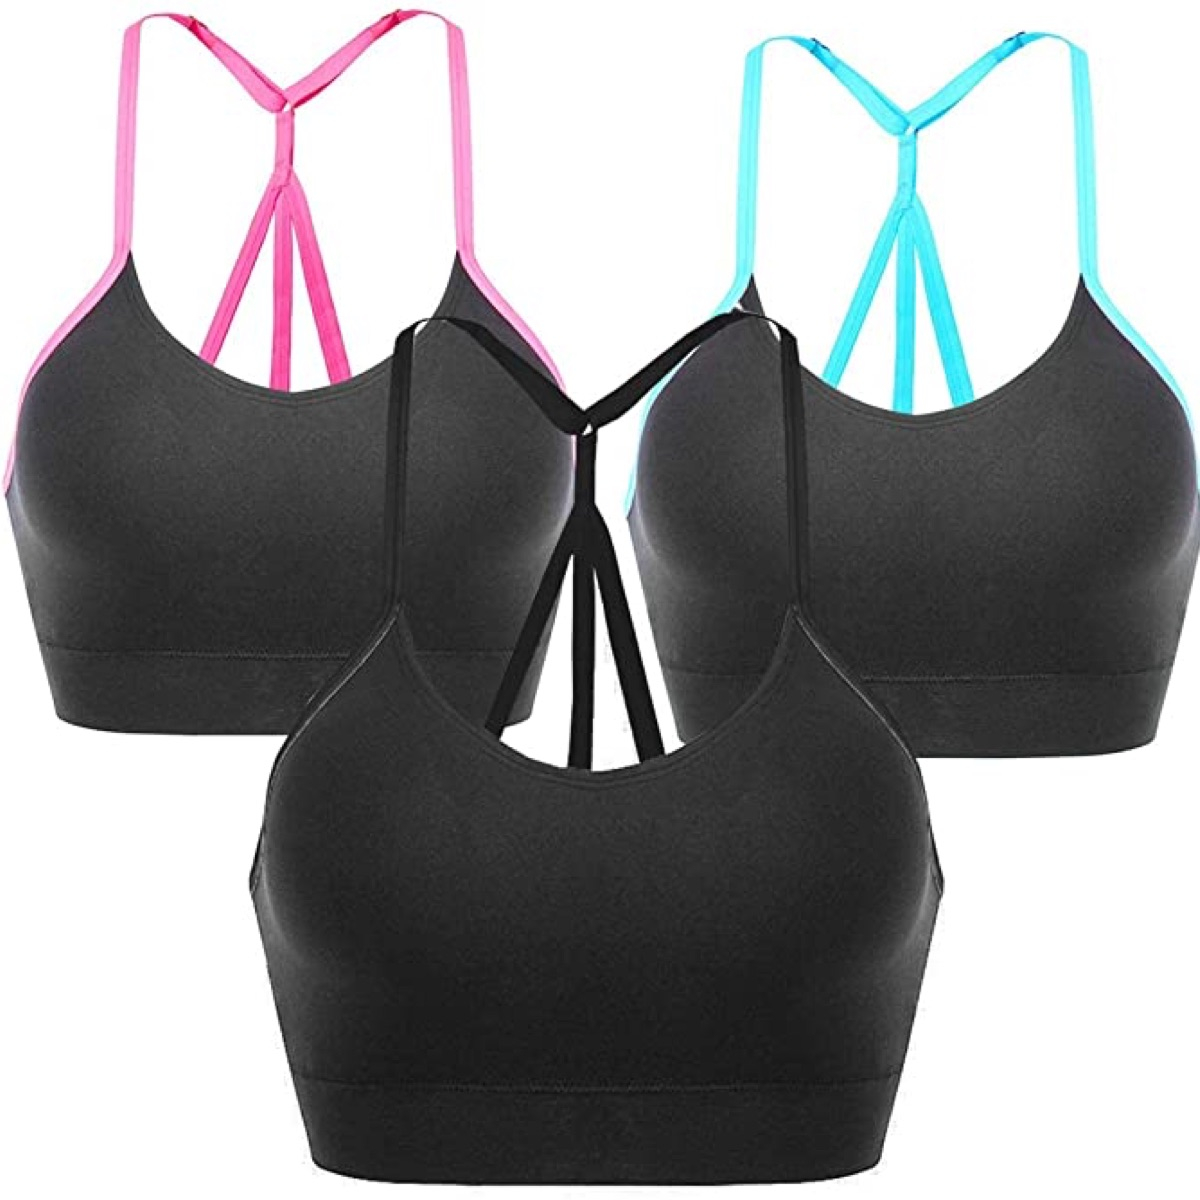 Buy Pack of 5 Beginner Sports Bras Online at Best Prices in India